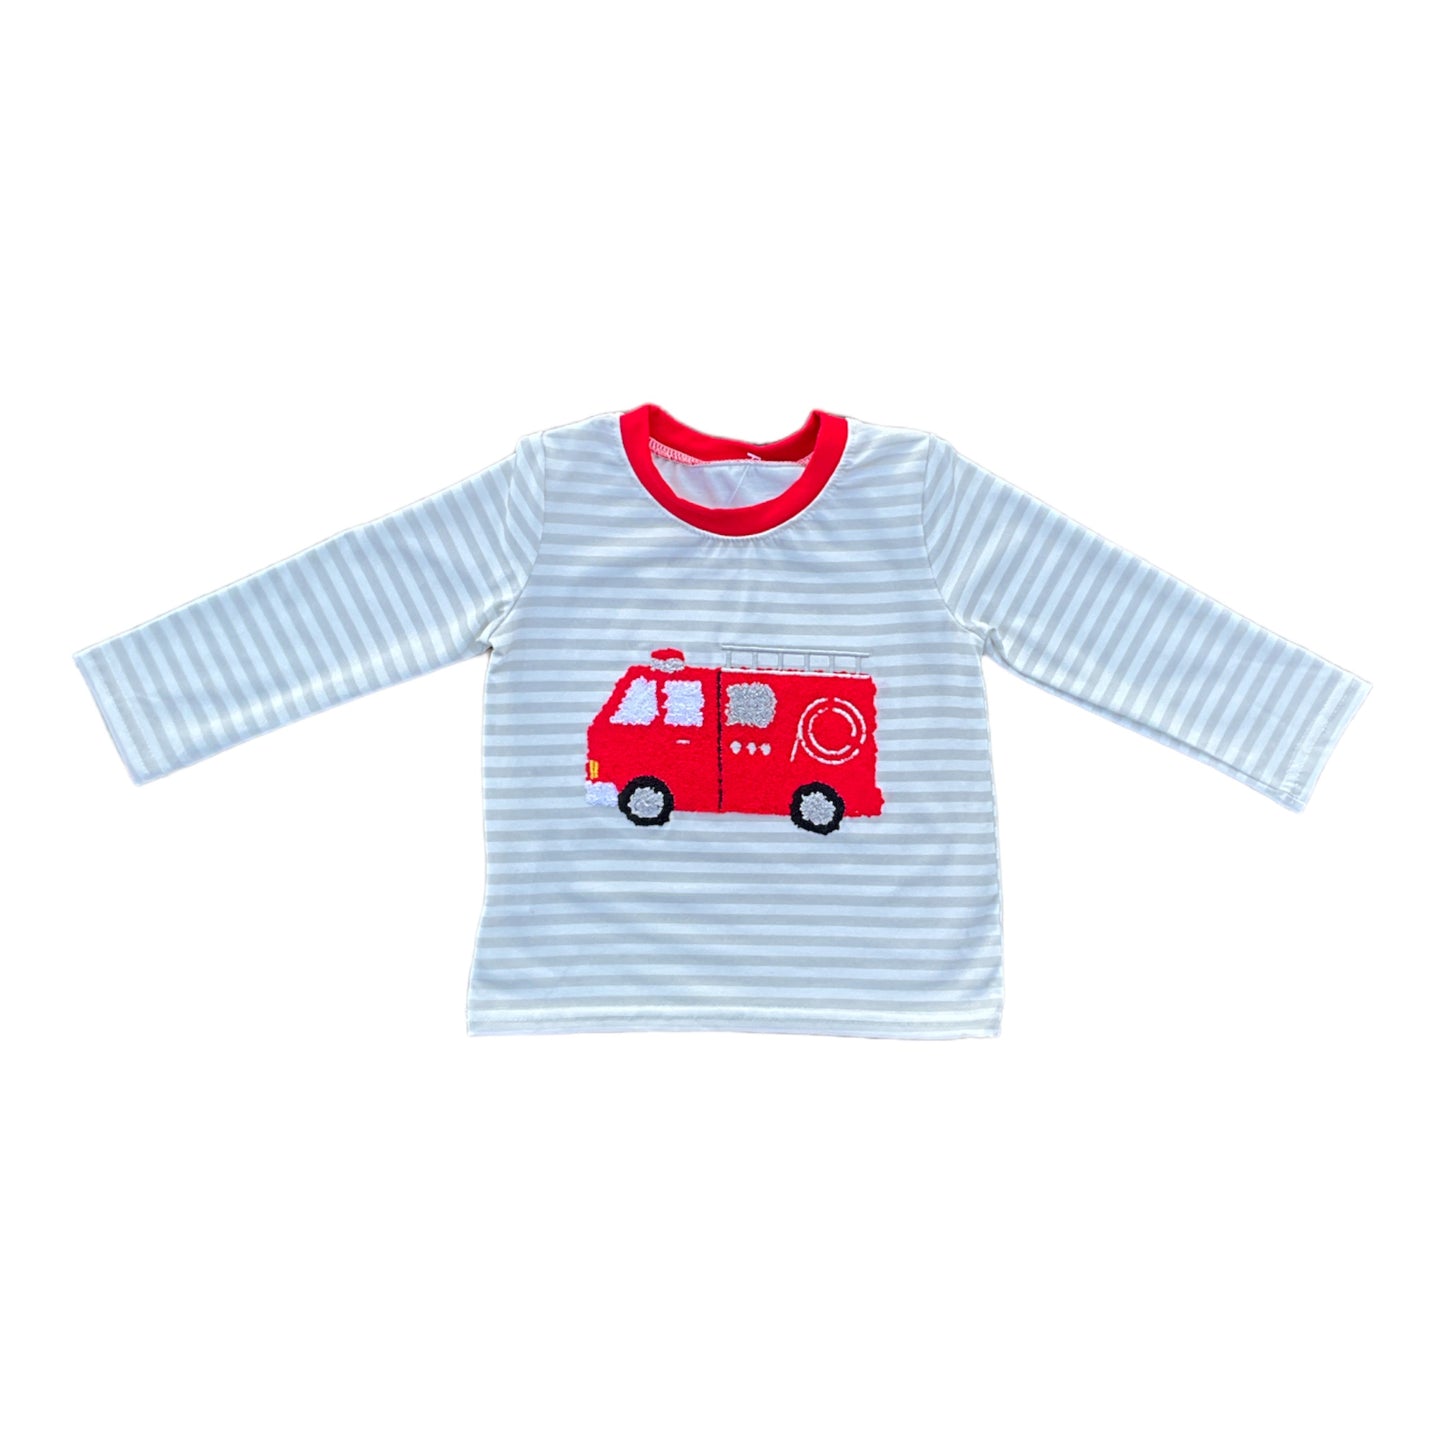 Fire Truck French Knot Top